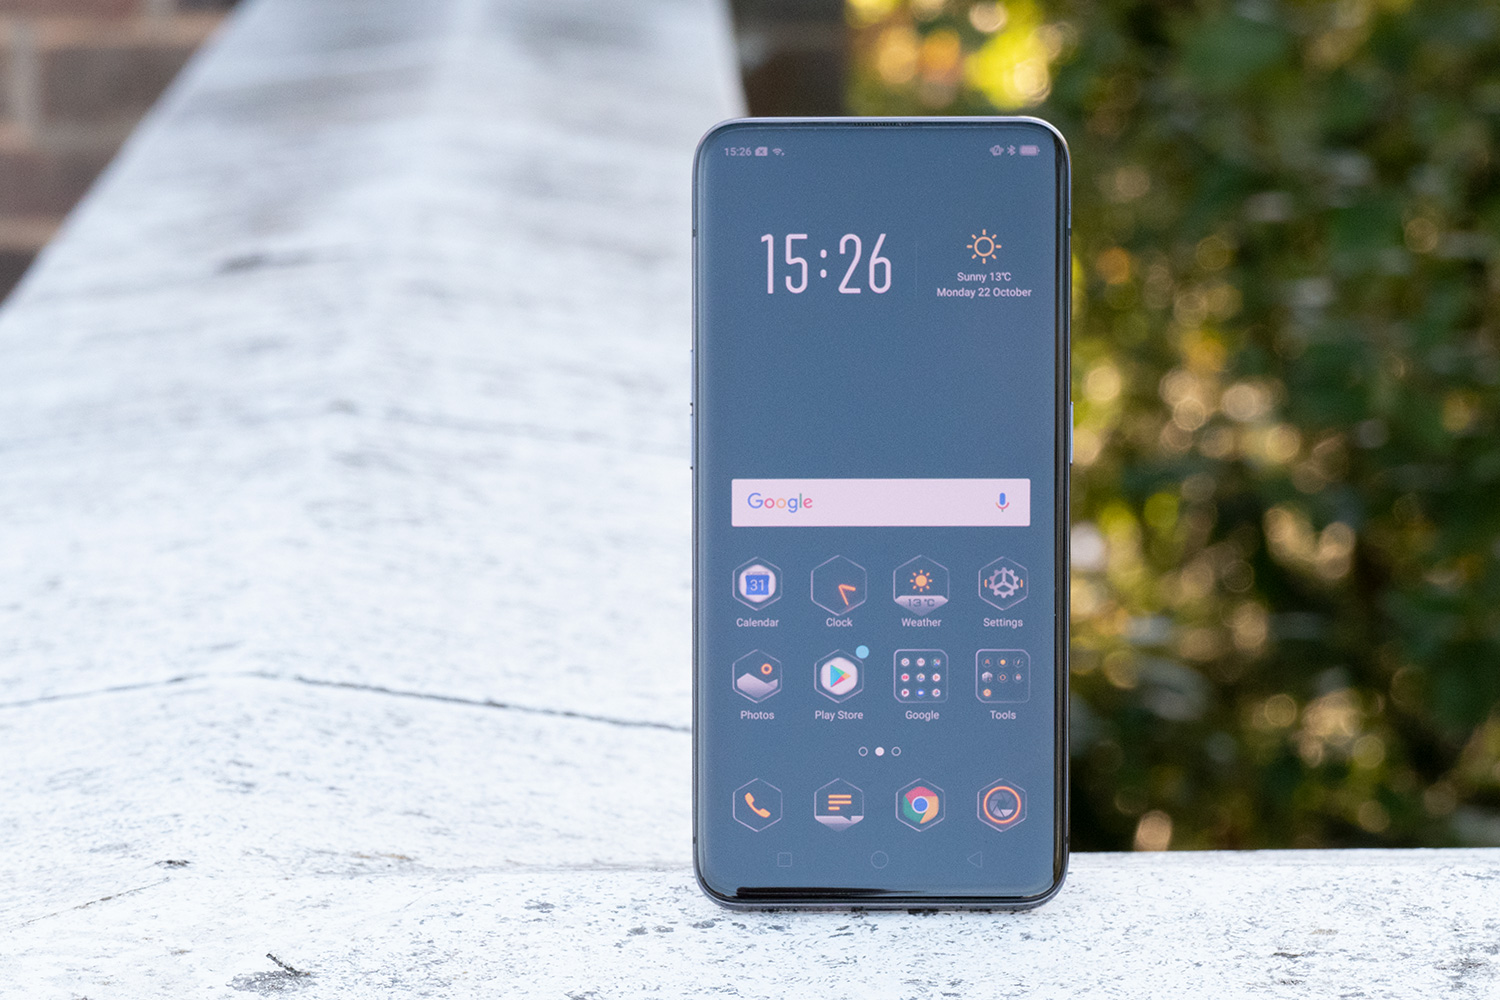 Oppo Find X review: The all-screen phone of the future is finally here